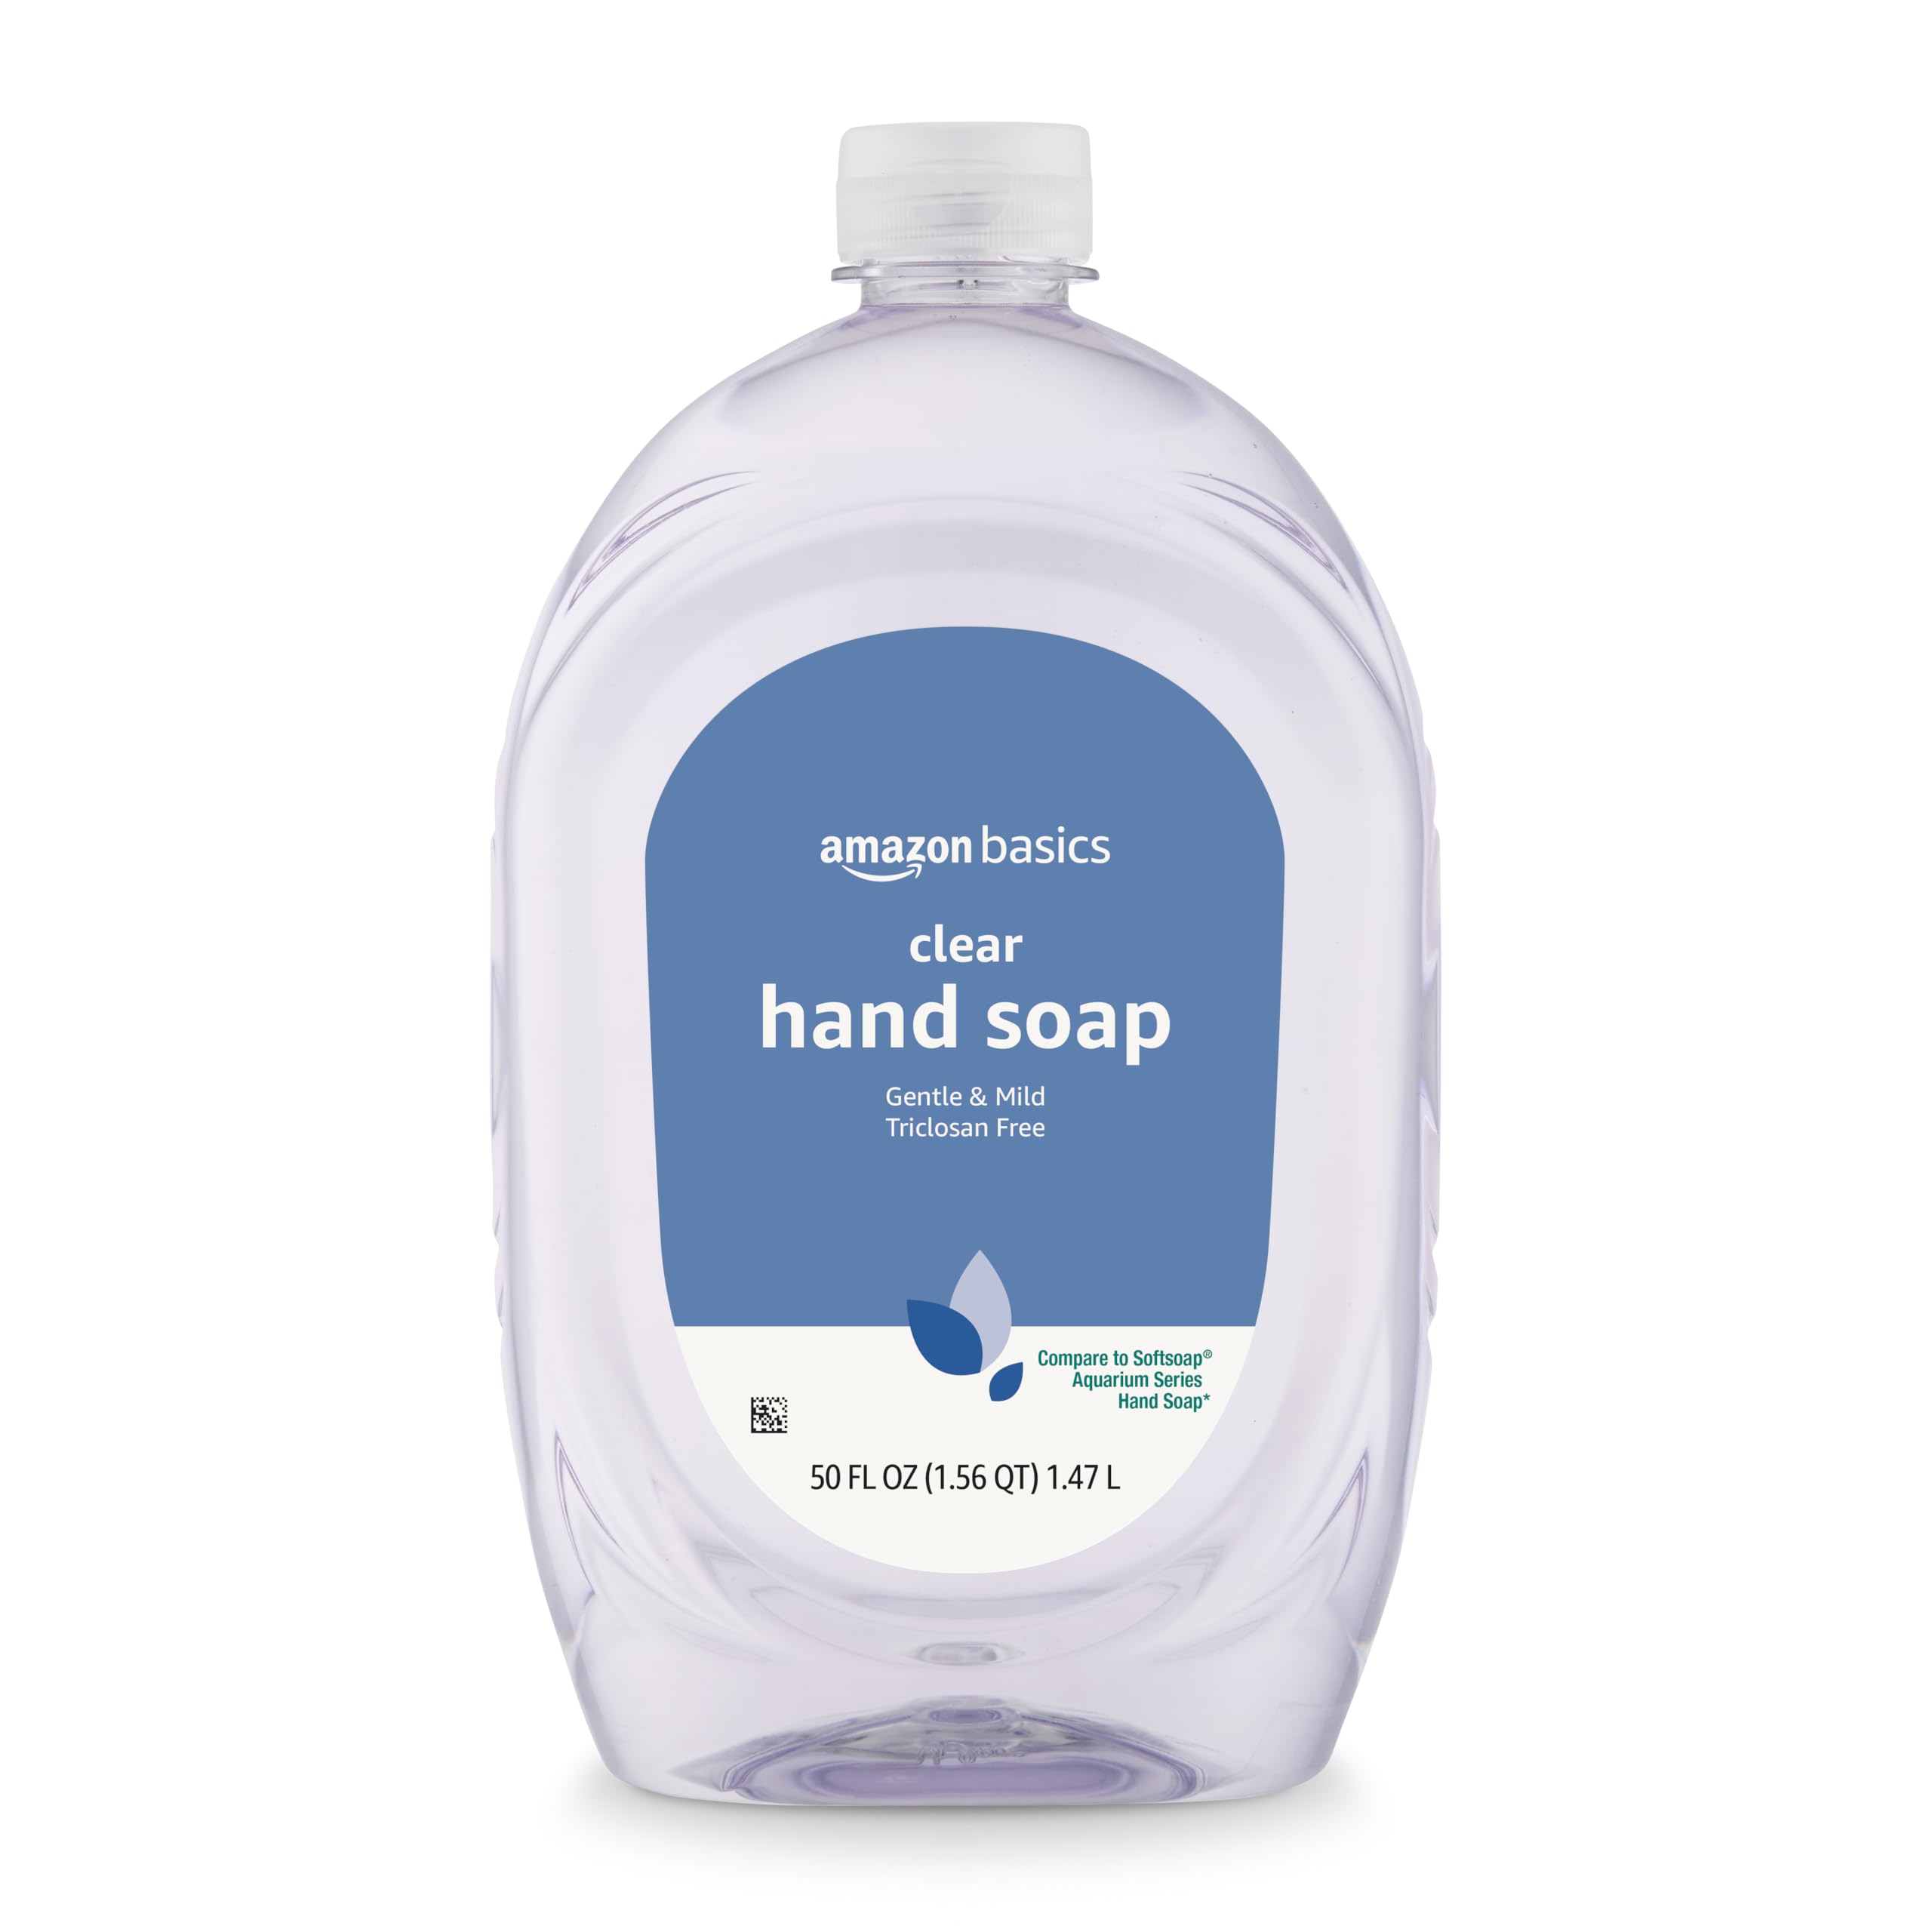 Amazon Basics Gentle & Mild Clear Liquid Hand Soap Refill, Triclosan-free, 50 Fluid Ounces, 1-Pack (Previously Solimo) $3.38